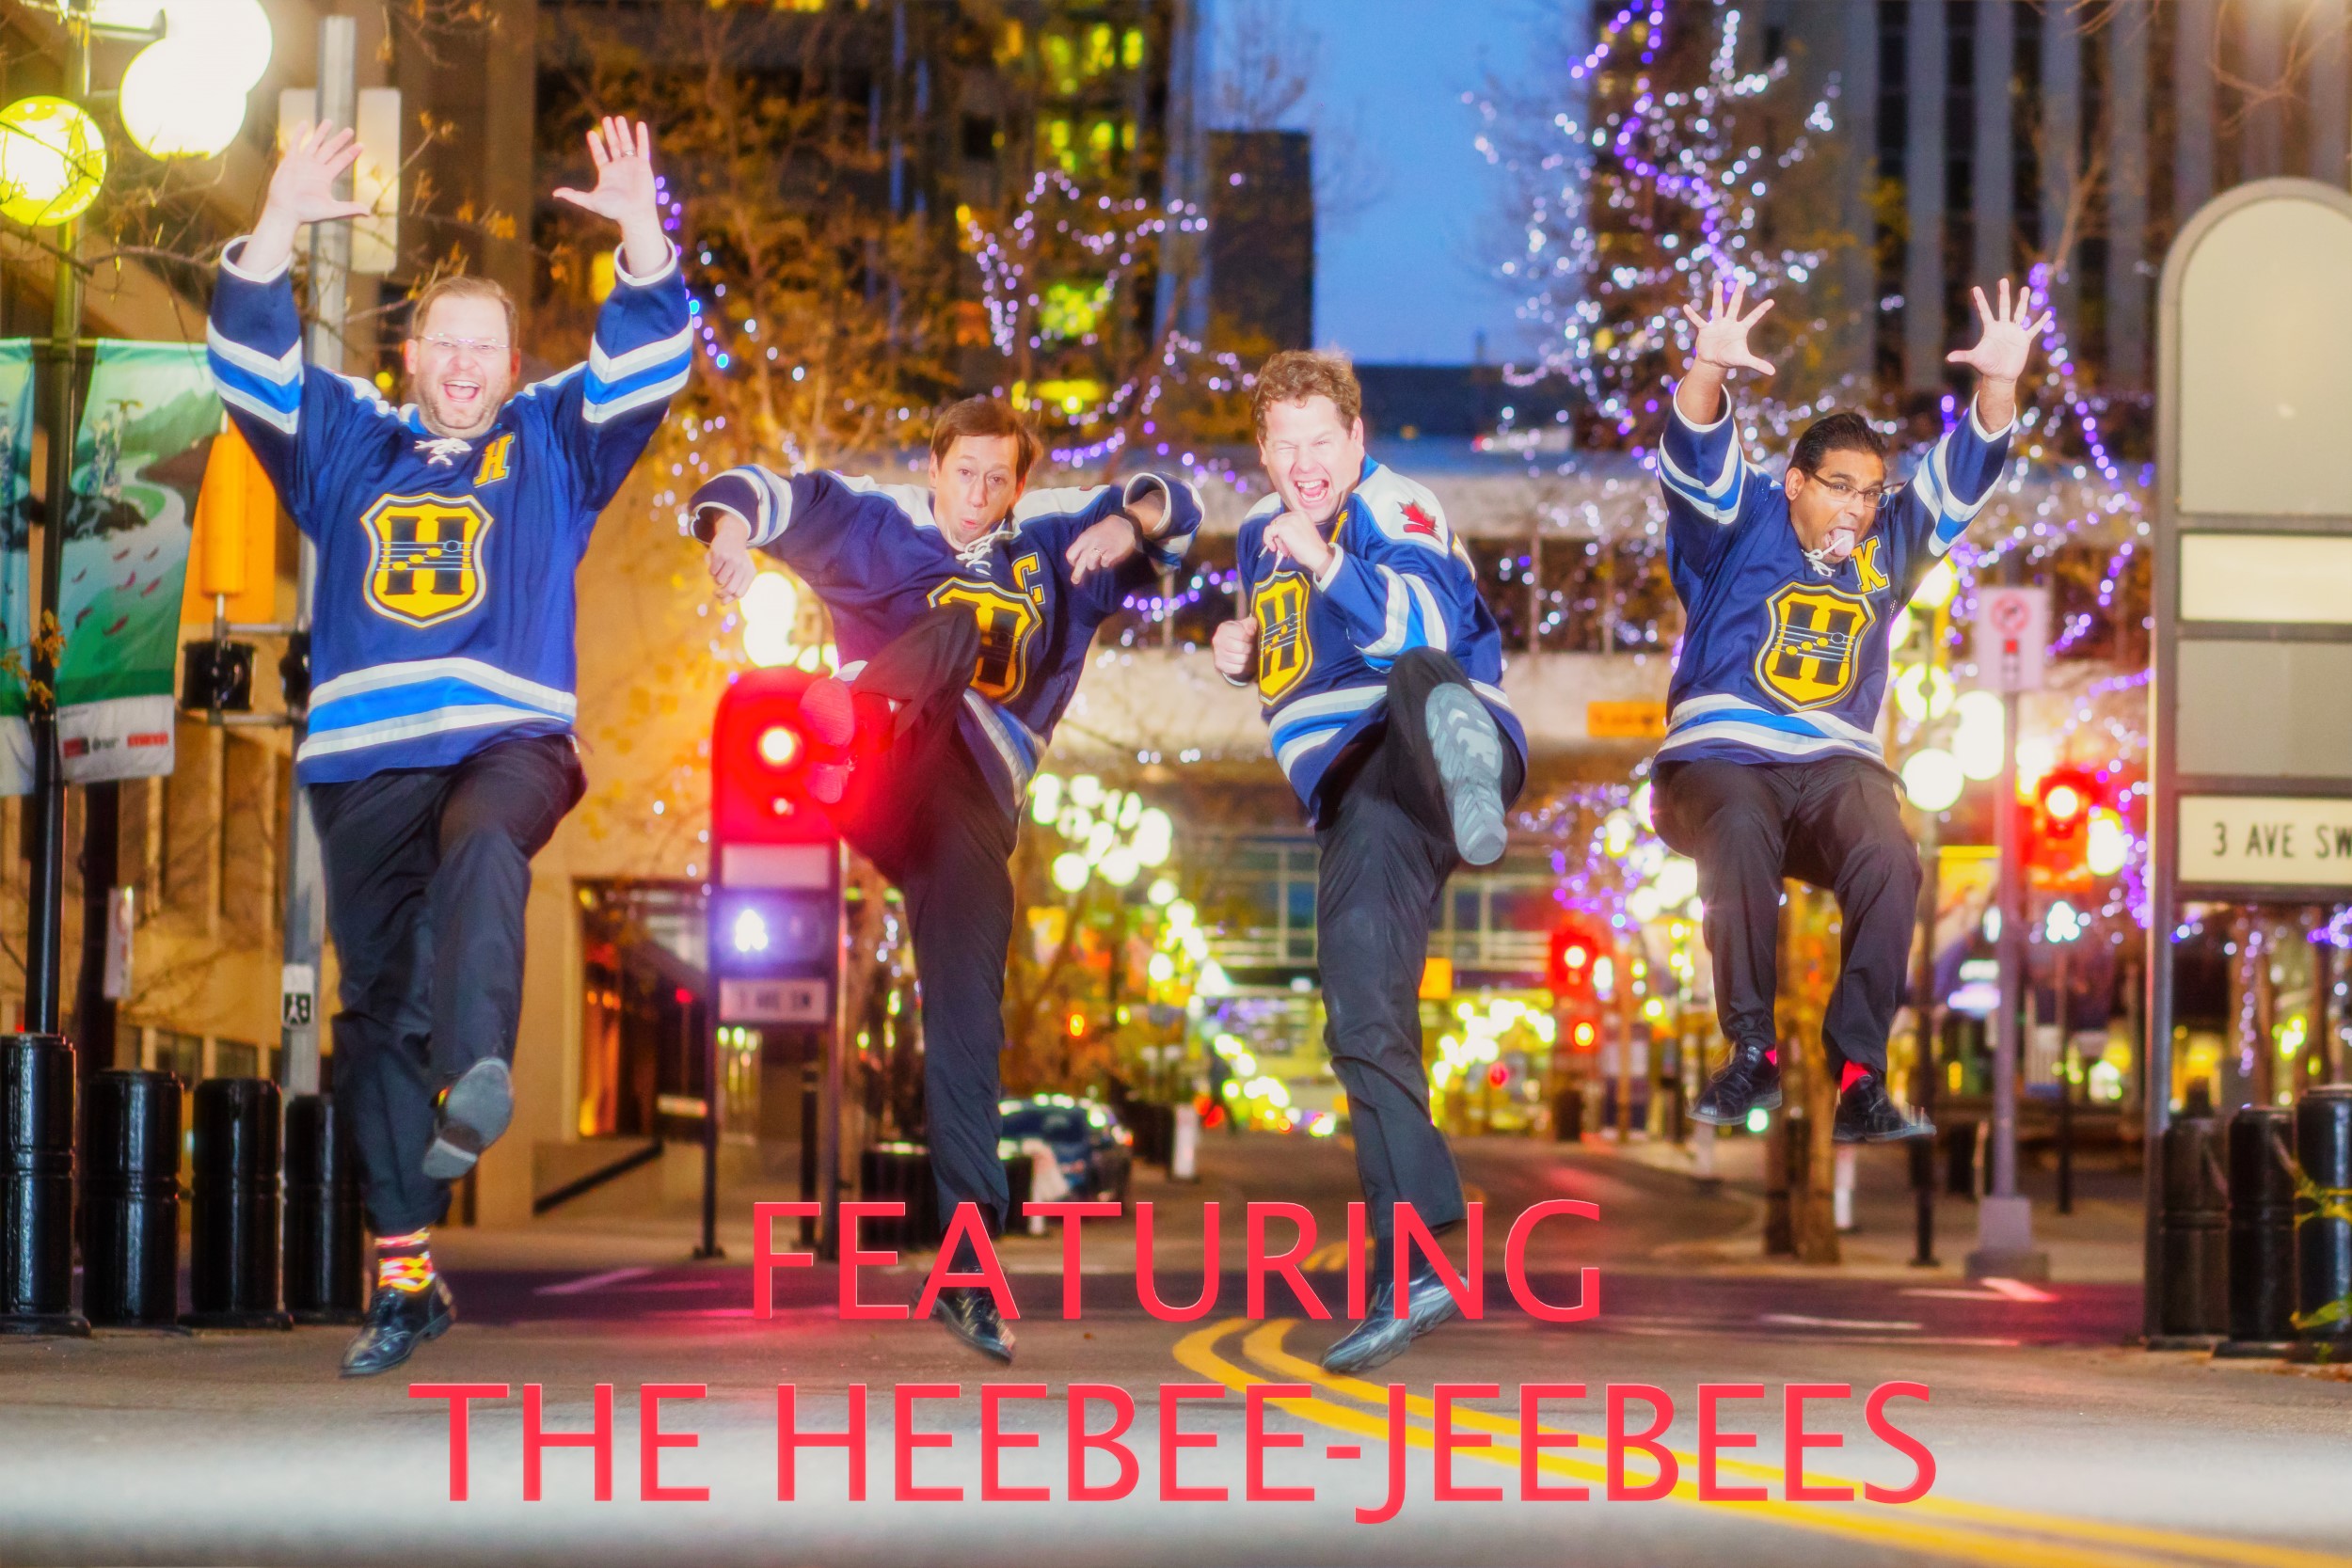 The music group the heebee-jeebees jumping in the street